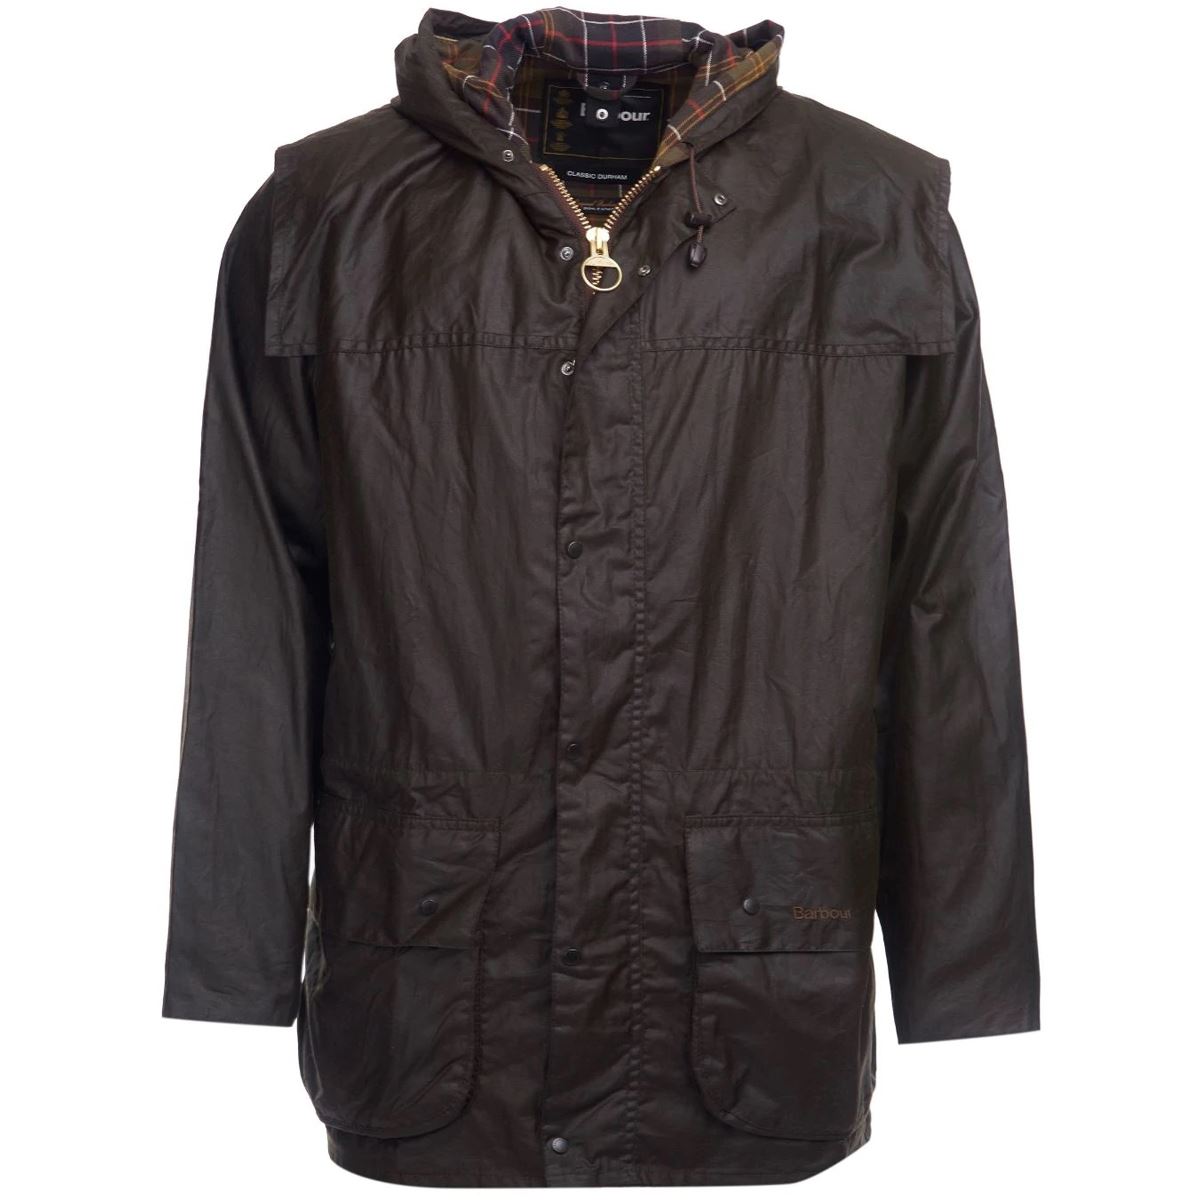 Does the Barbour Durham Jacket work with Barbour's interactive system?